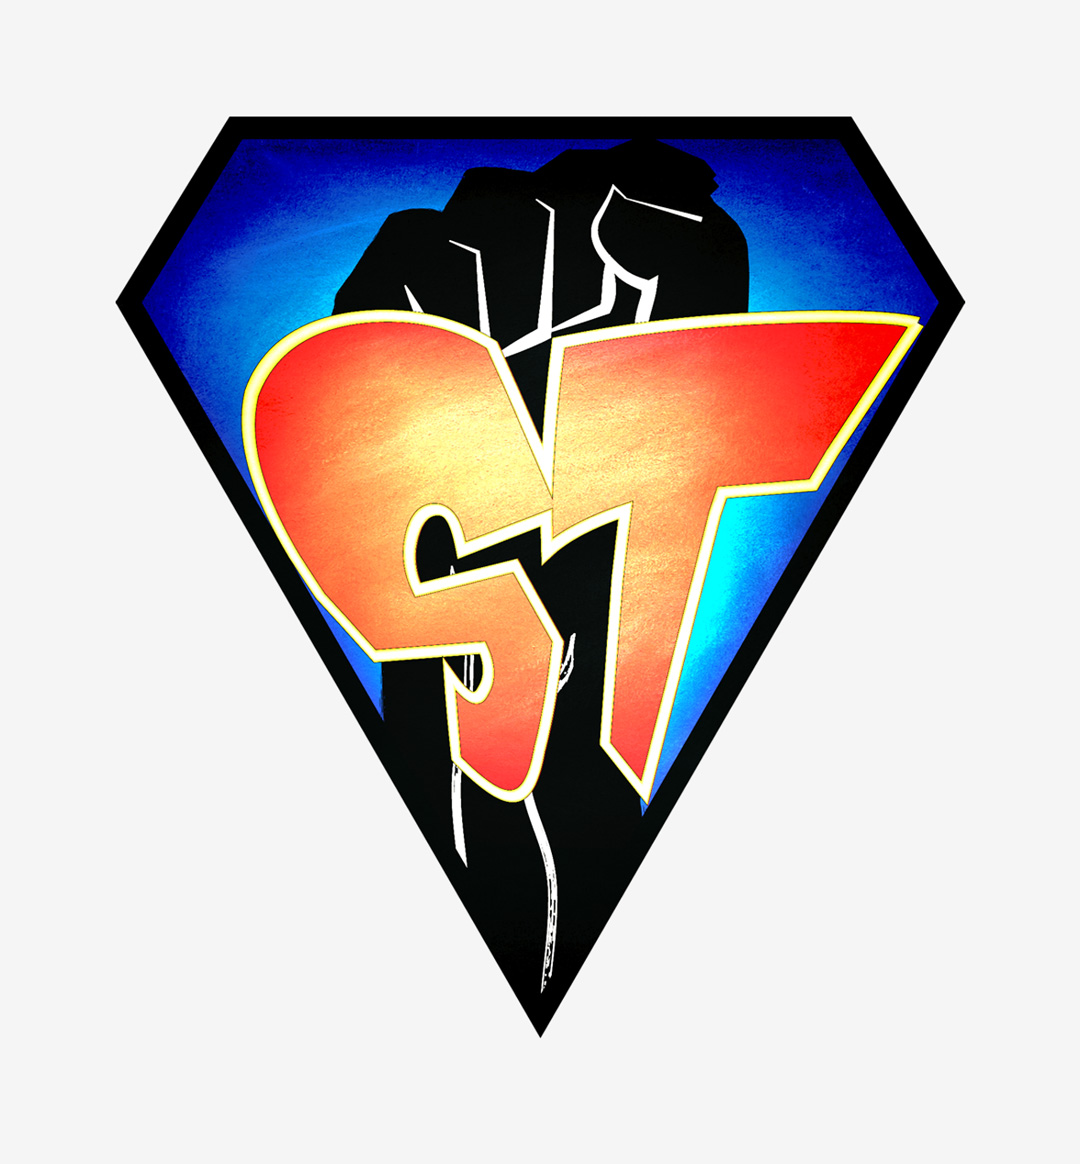 This image shows the final logo for the band. It is a diamond shaped logo, with a blue background and a fist reaching towards the sky. In the foreground, the letters S.T. sit in bright orange, representing the name of the band, Saving Today.